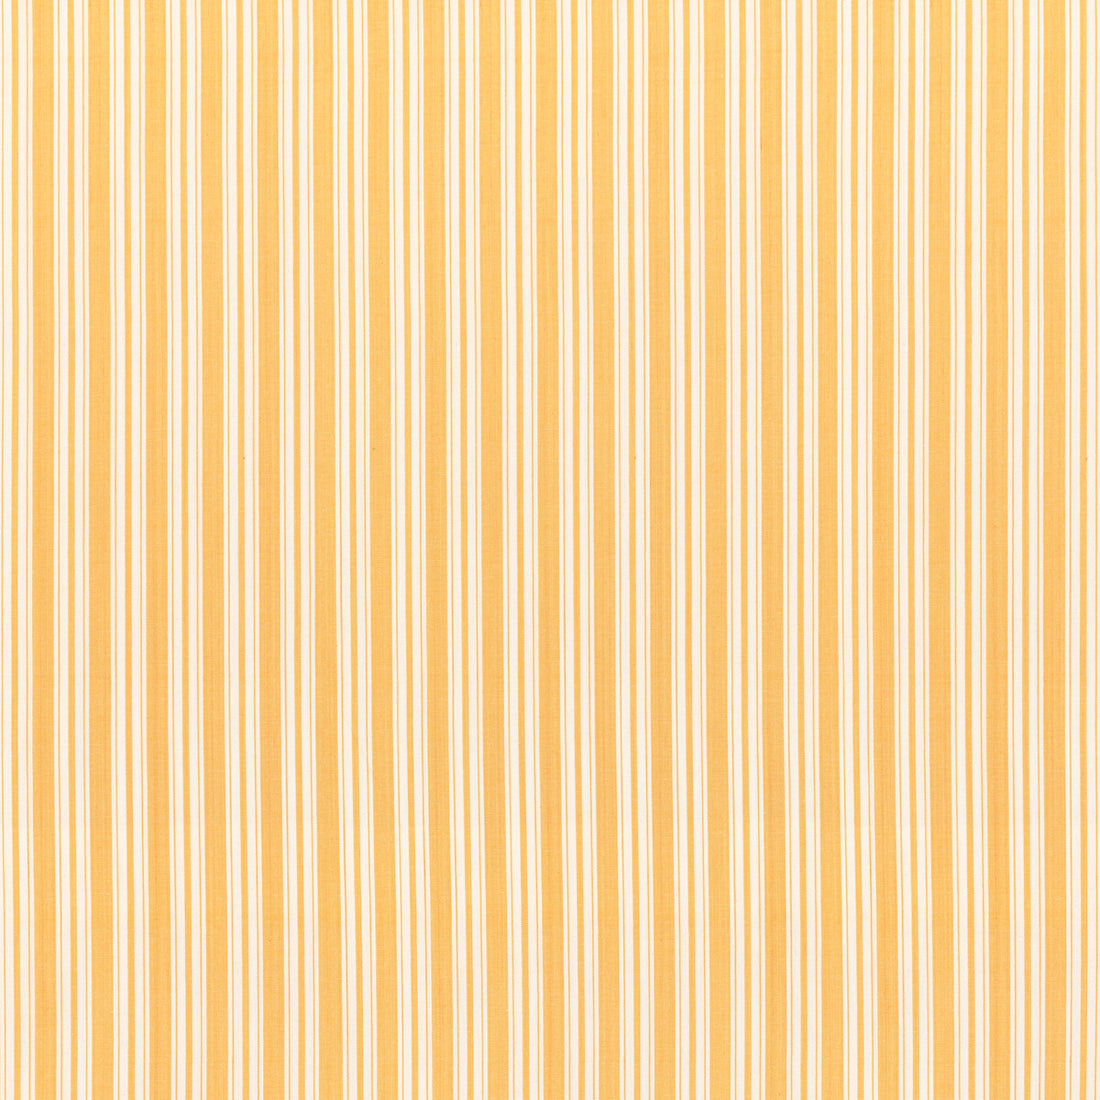 Selune Stripe fabric in yellow color - pattern 8022118.40.0 - by Brunschwig &amp; Fils in the Normant Checks And Stripes II collection